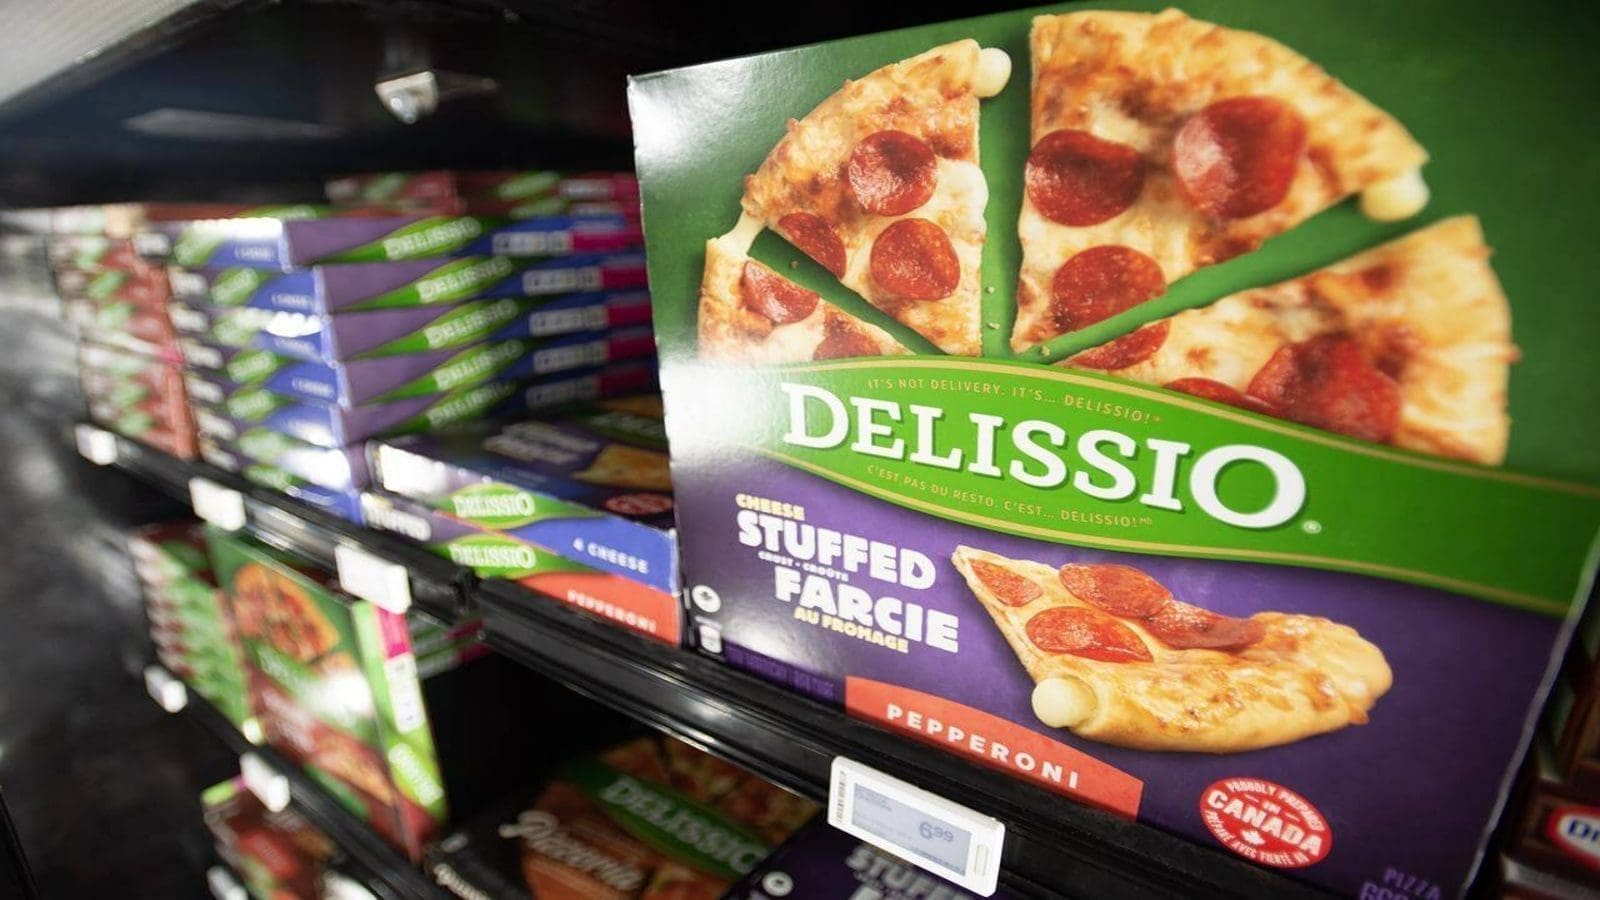 Nestlé plans to further raise product prices, ends commercialization of frozen meals and pizza in Canada